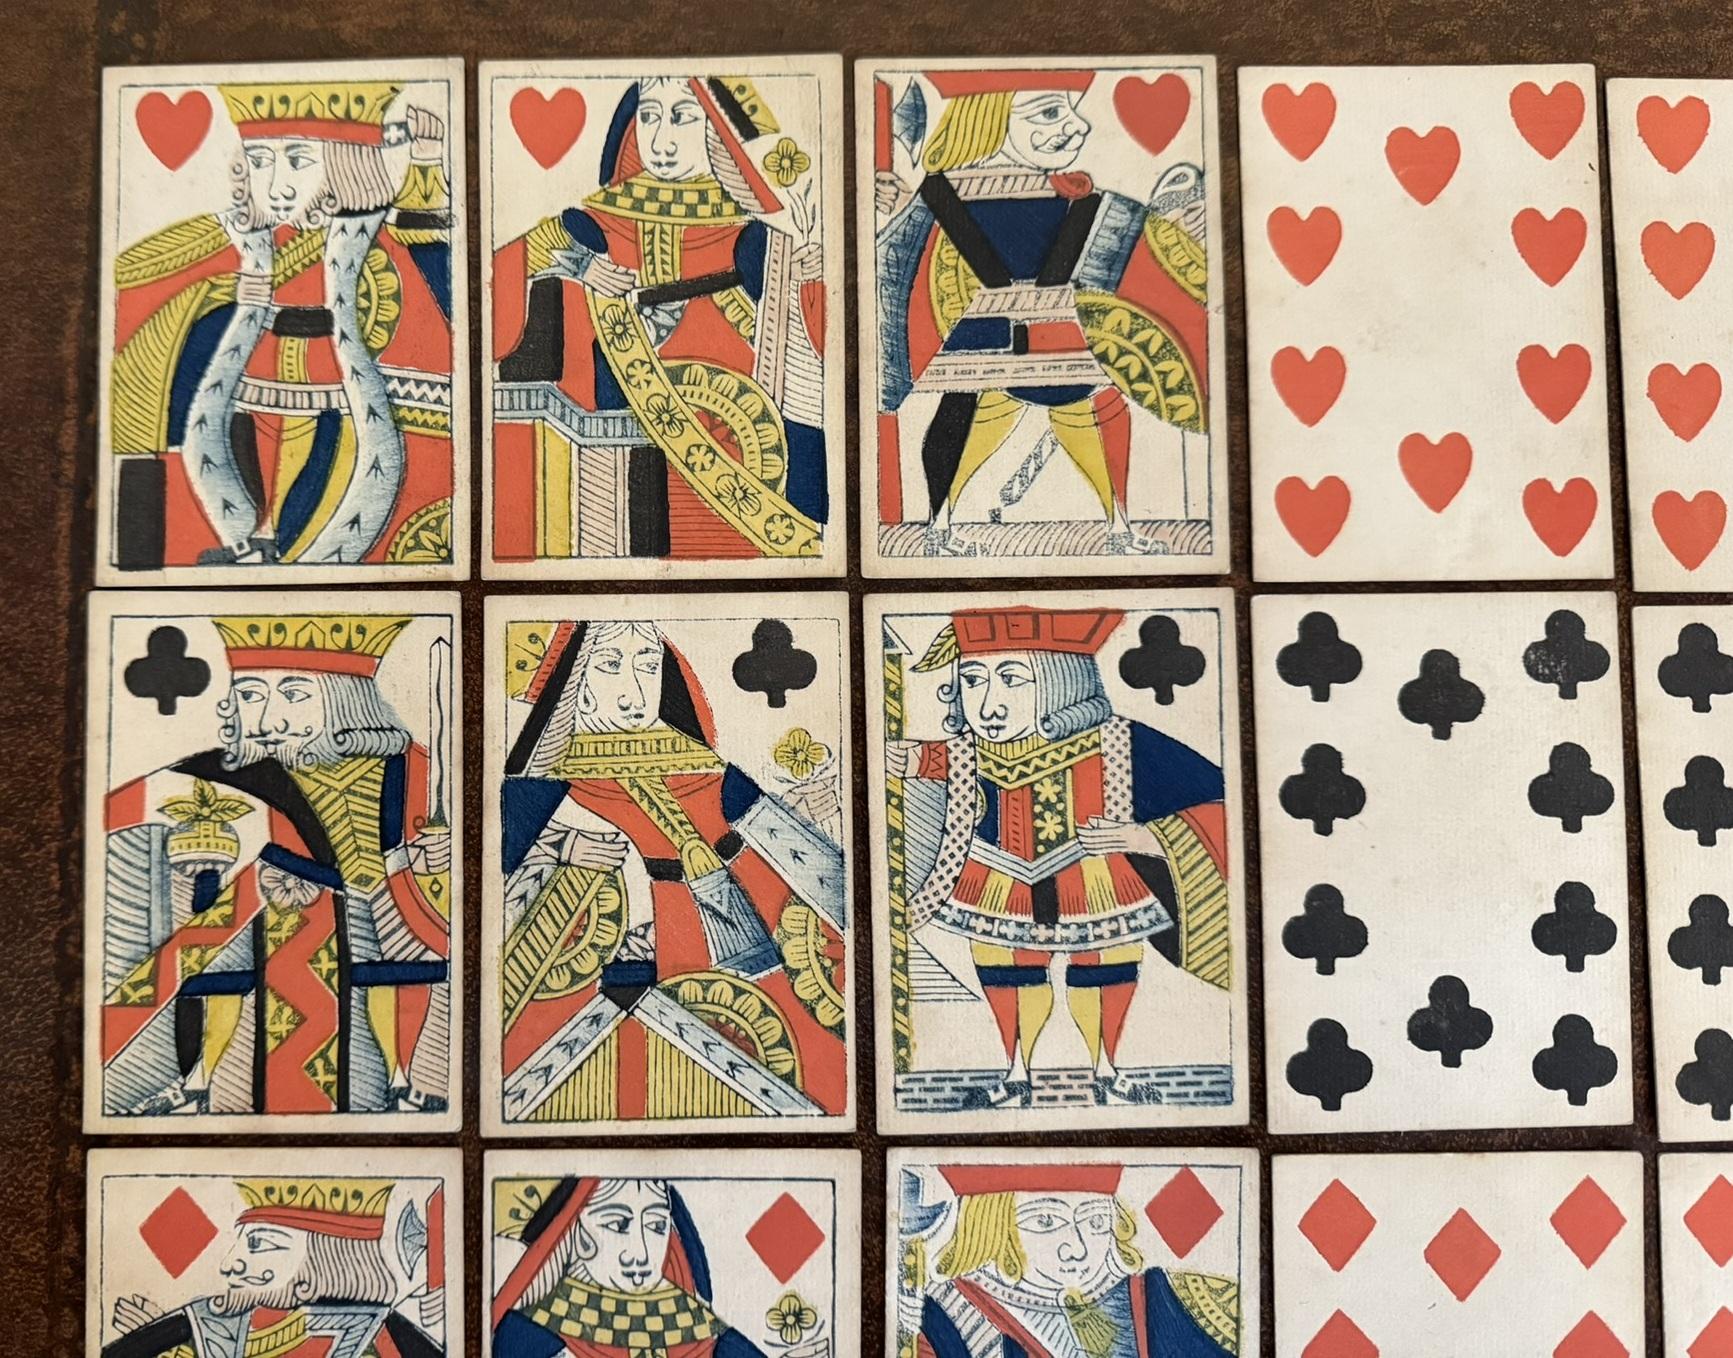 ANTIQUE 1830 THOMAS CRESWICK GEORGIAN PLAYiNG CARDS WITH FIZZLE ACE OF SPADES For Sale 7